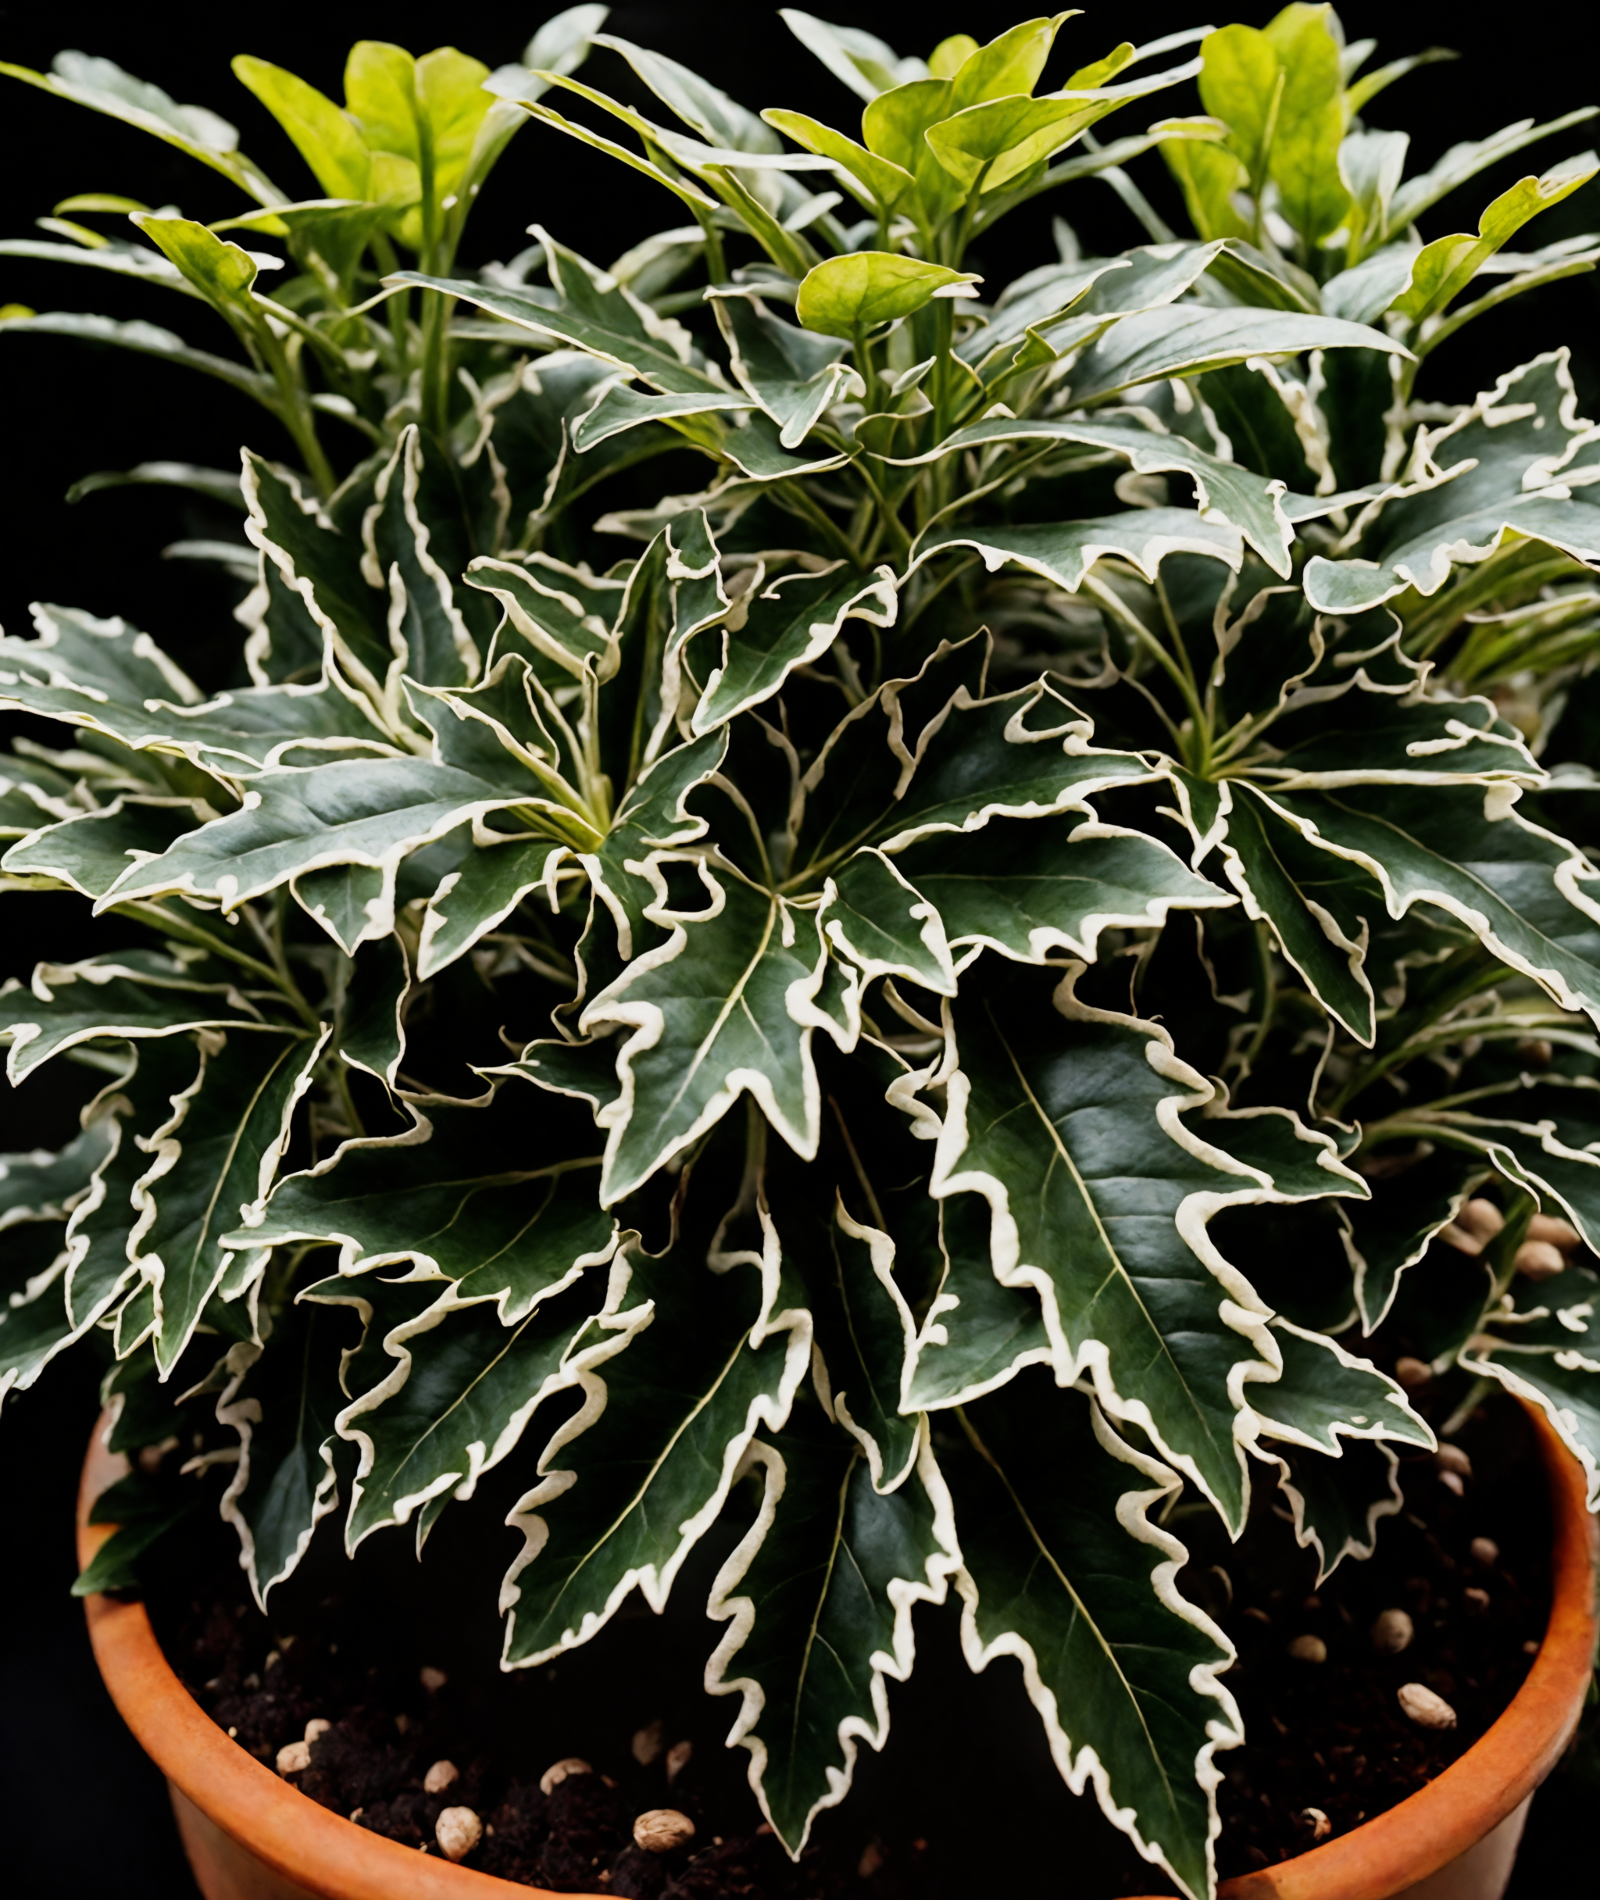 Plerandra elegantissima in a bowl planter, with its lush leaves against a dark background, well-lit and detailed.